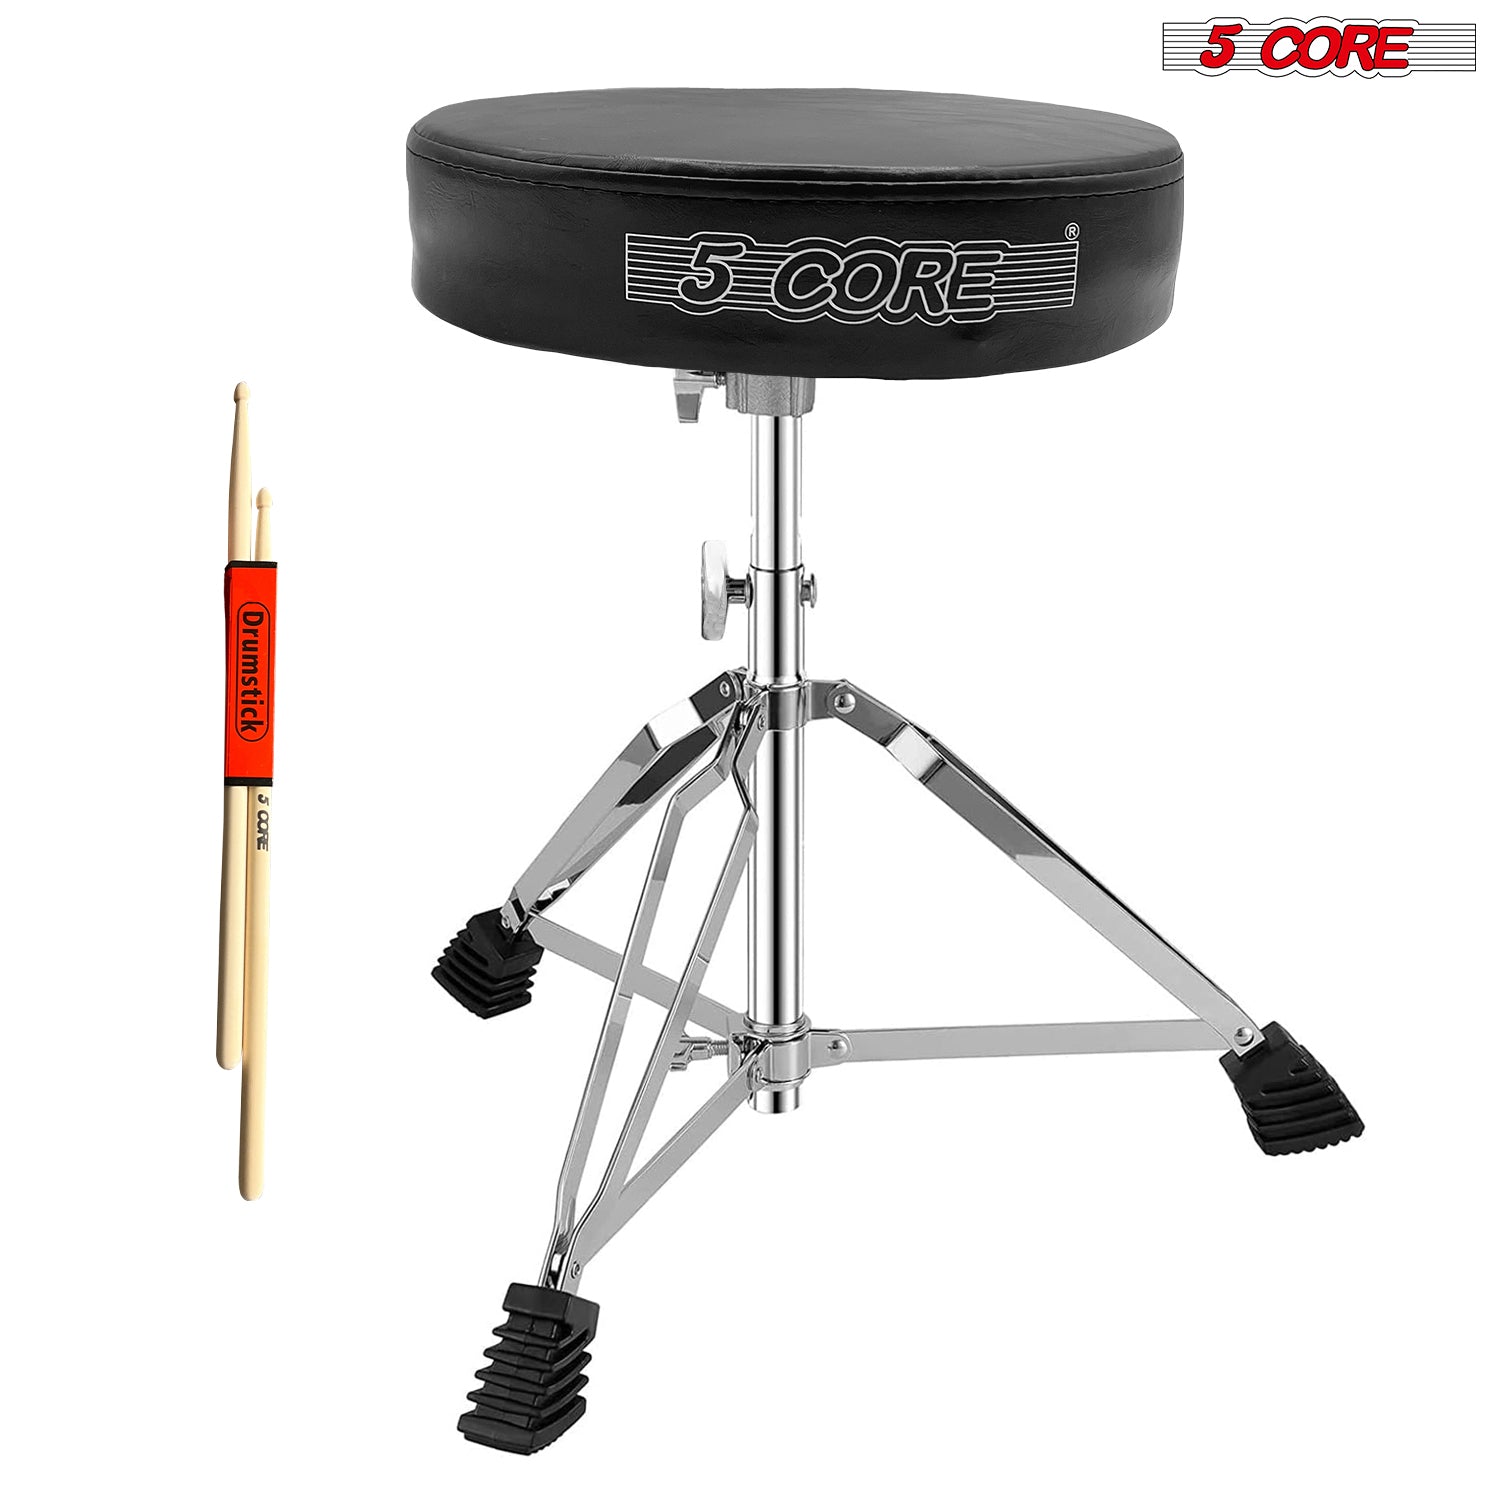 Guitar Stool: Practical and Stylish Addition to Your Setup